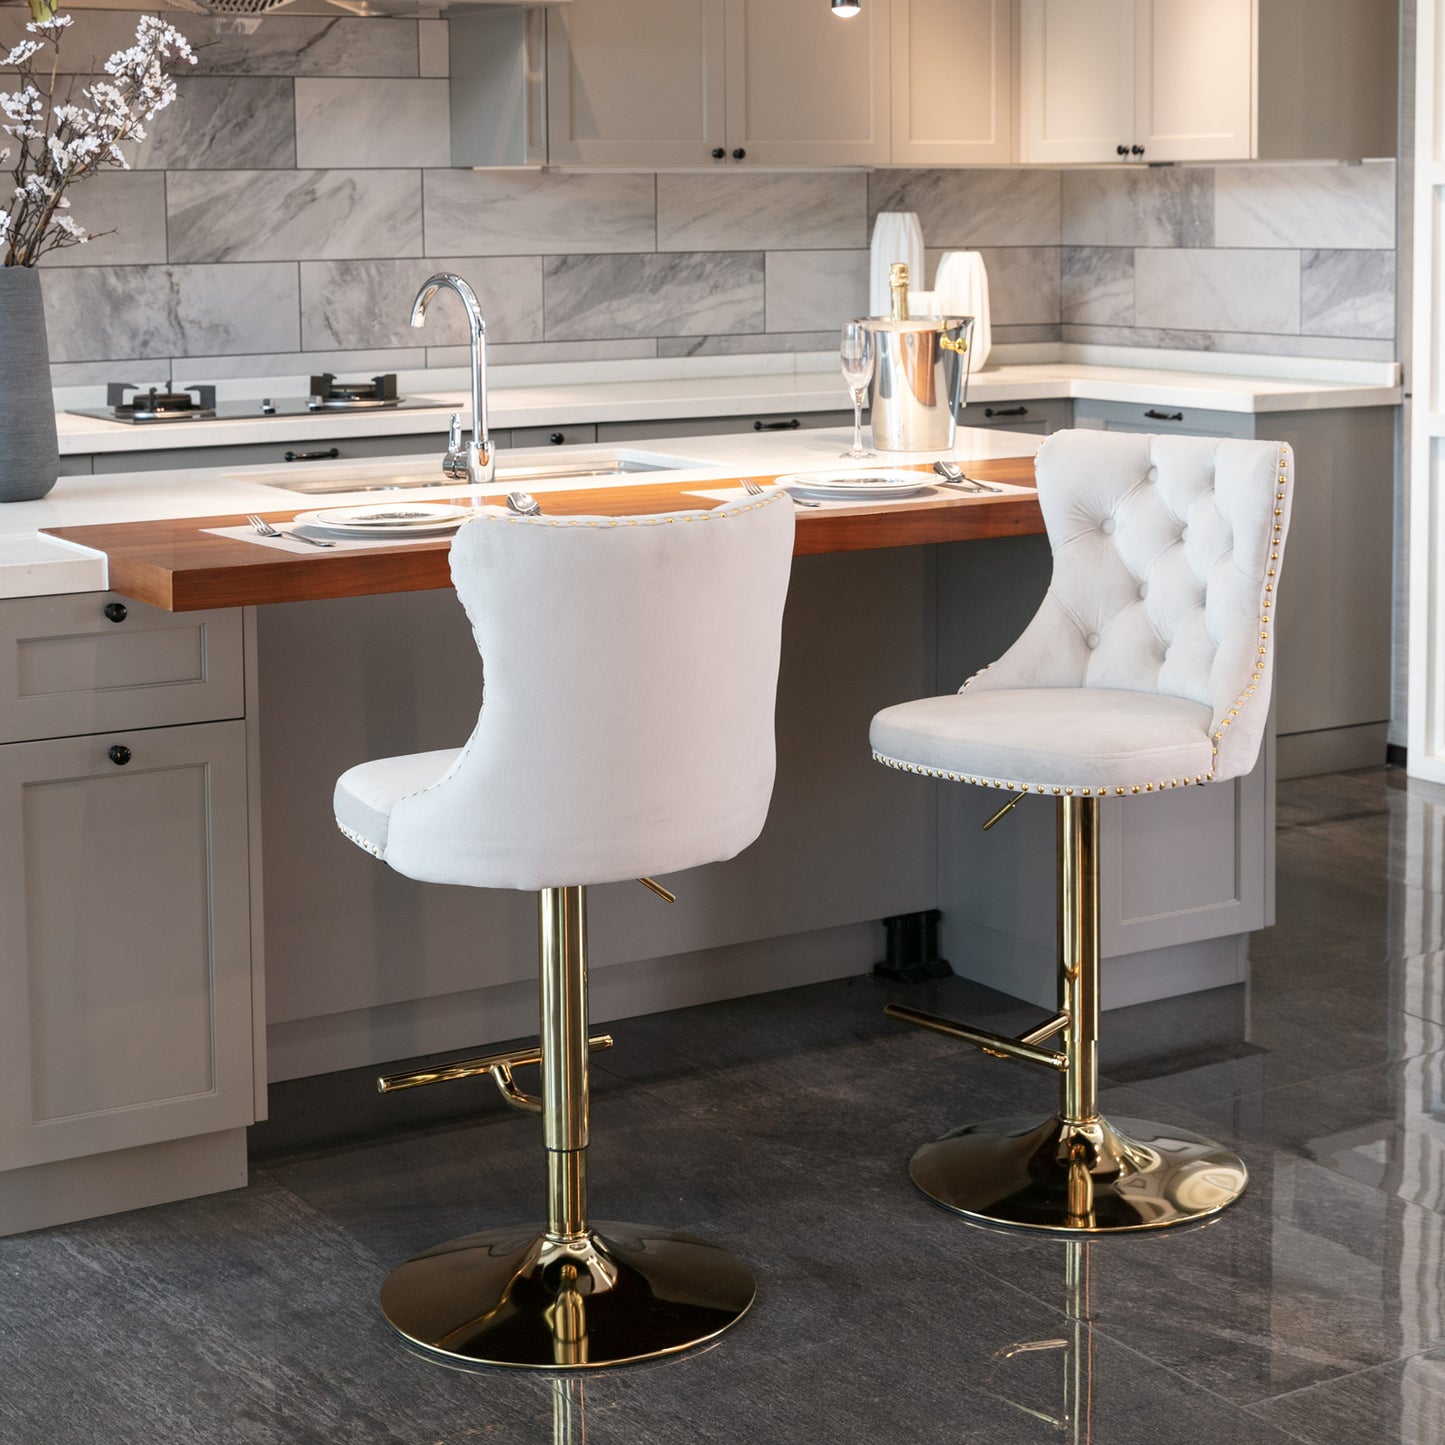 Golden Swivel Velvet Barstools Adjusatble Seat Height from 25-33 Inch, Modern Upholstered Bar Stools with Backs Comfortable Tufted for Home Pub and Kitchen Islandeige, Set of 2)